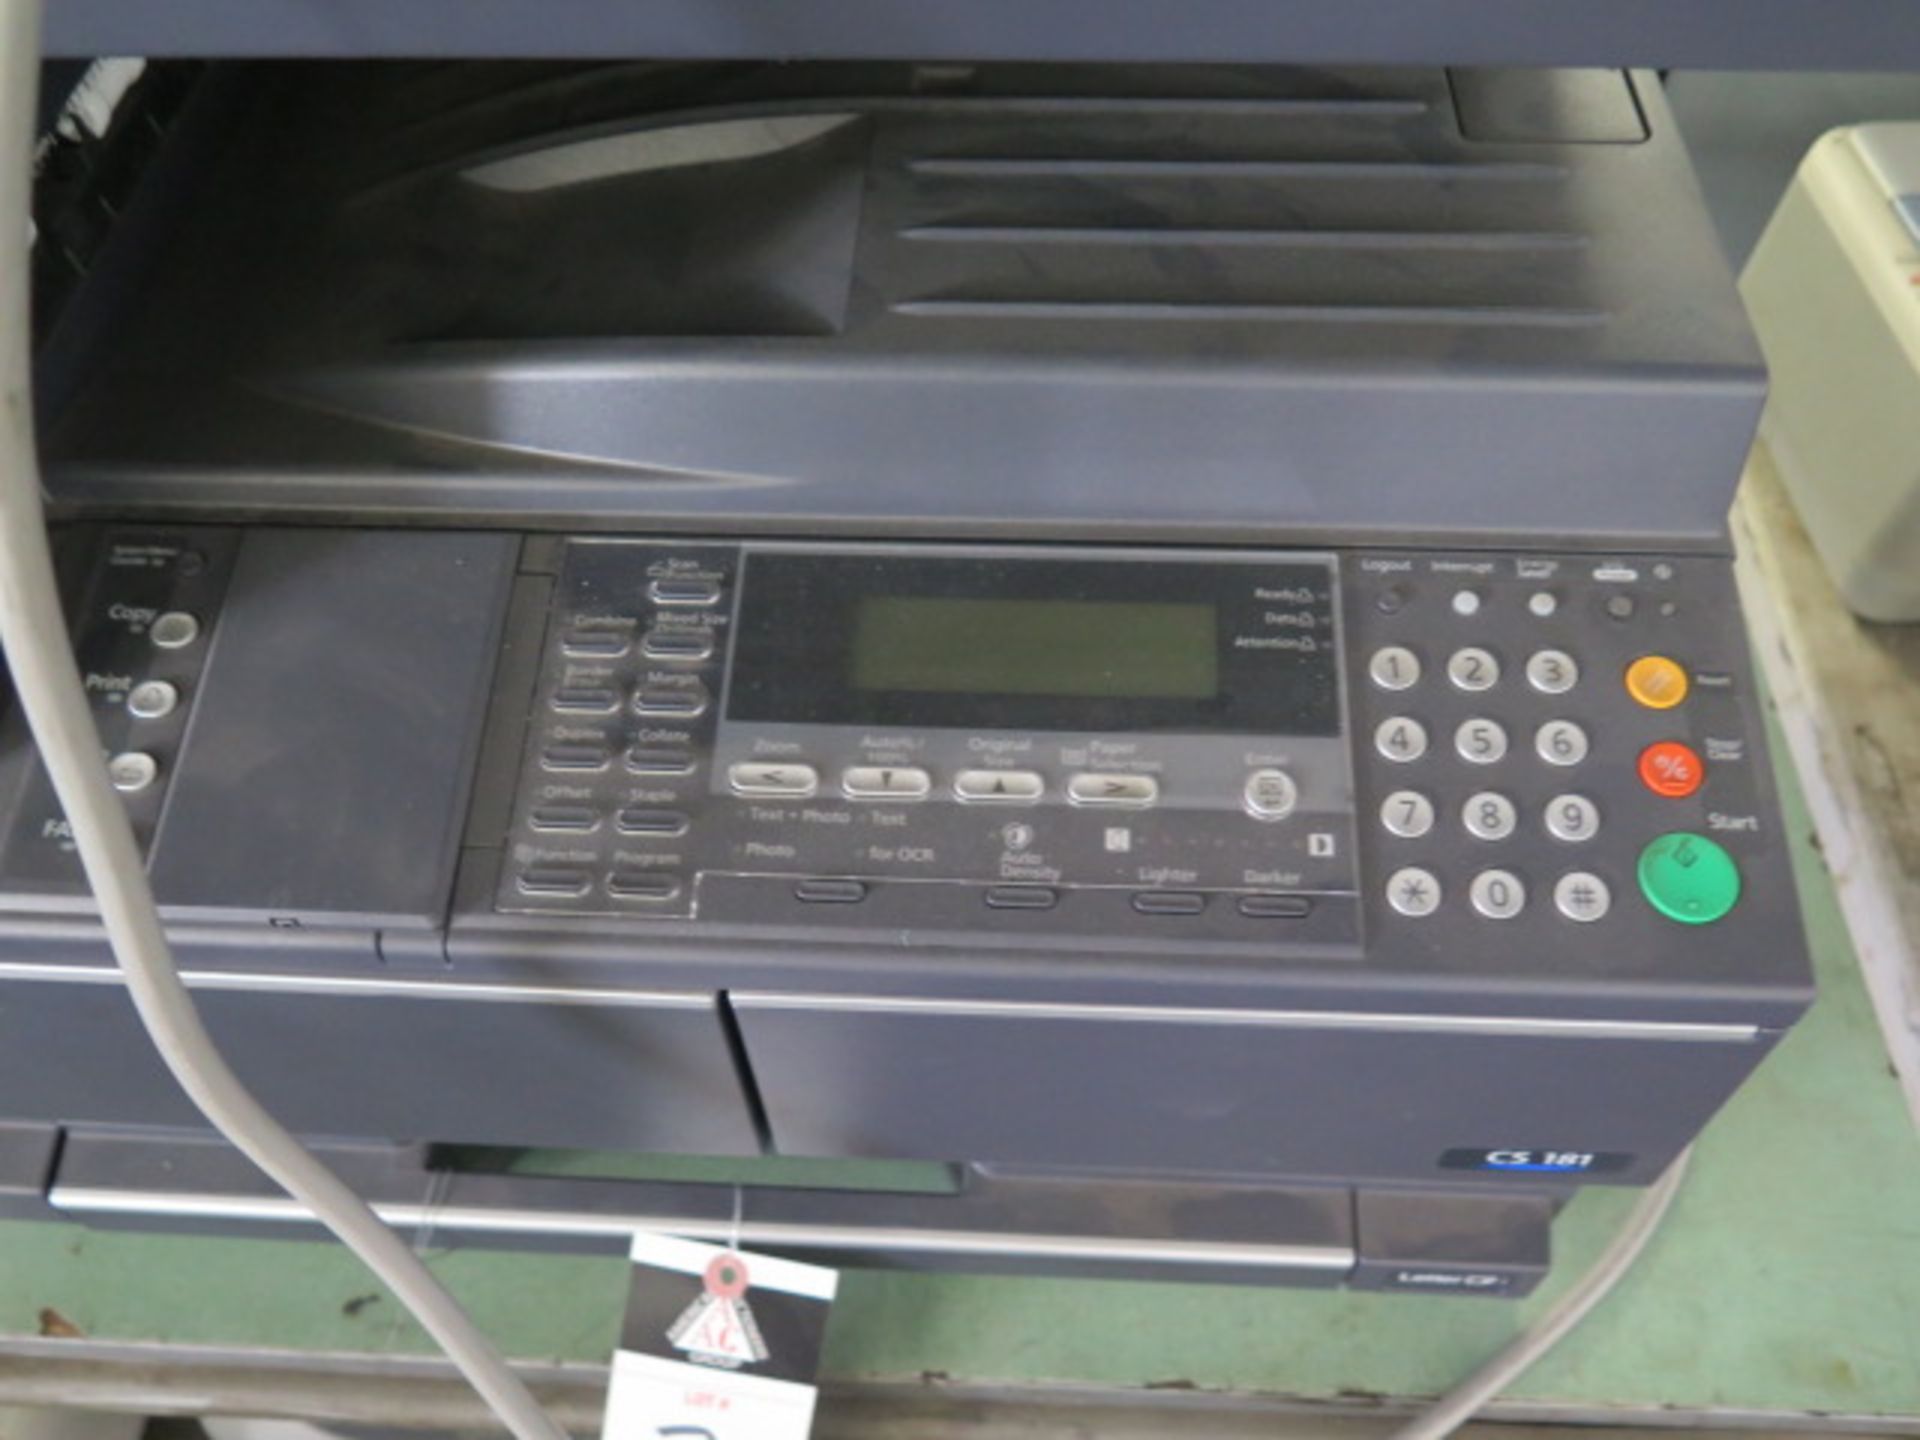 CopyStar CS181 Office Copy/Print/Scan/FAX Machine and Office Printers - Image 4 of 4